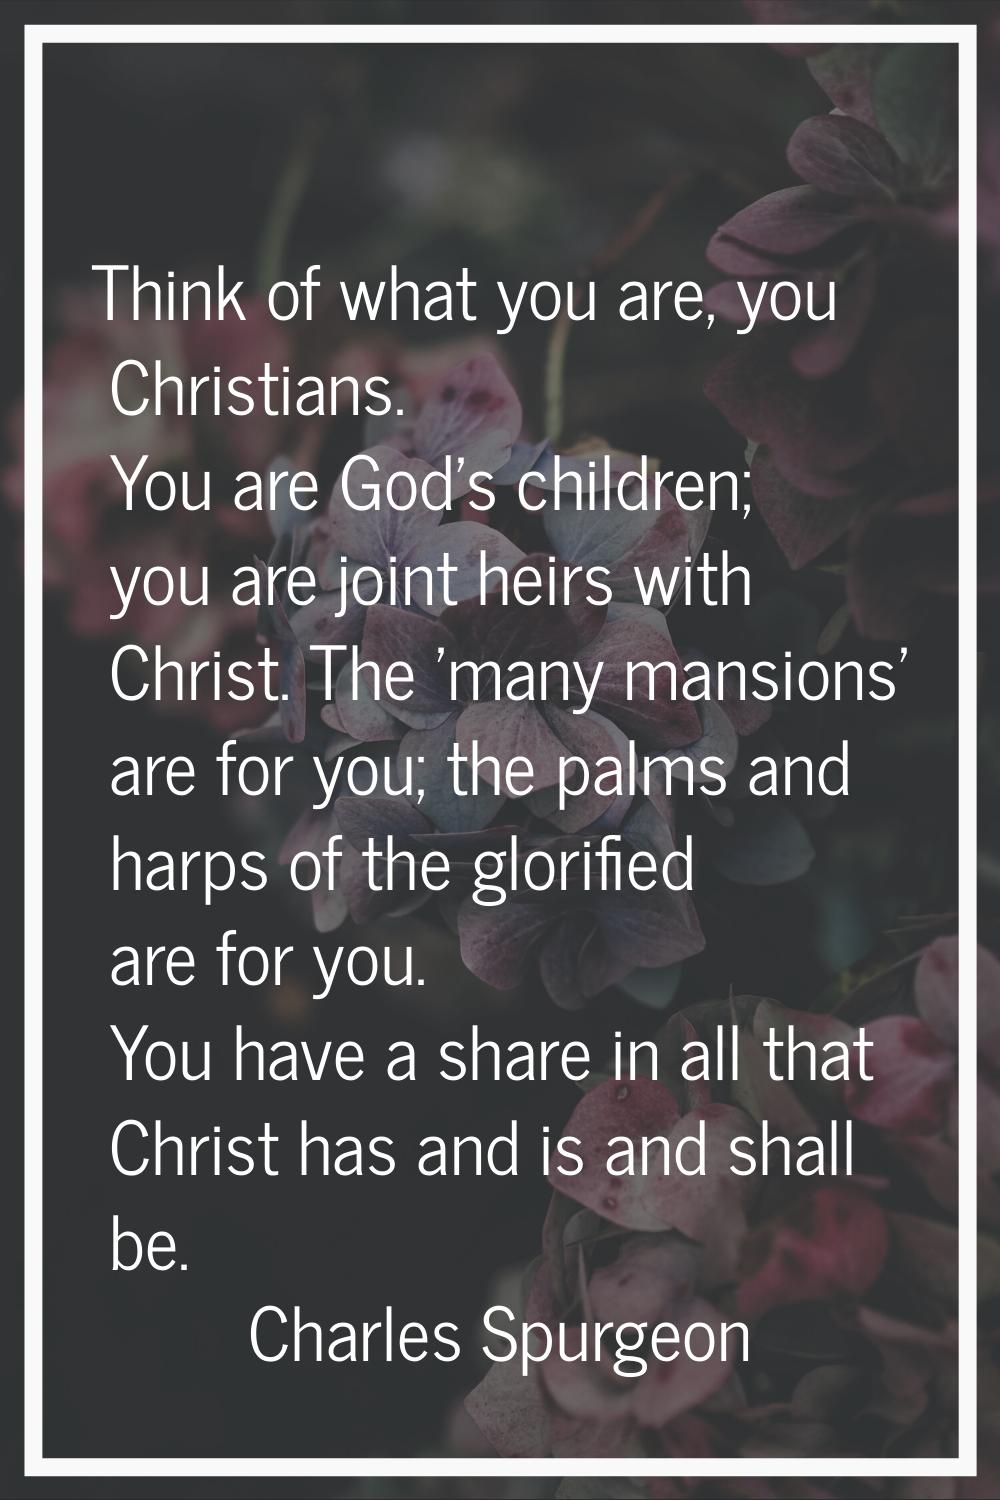 Think of what you are, you Christians. You are God's children; you are joint heirs with Christ. The